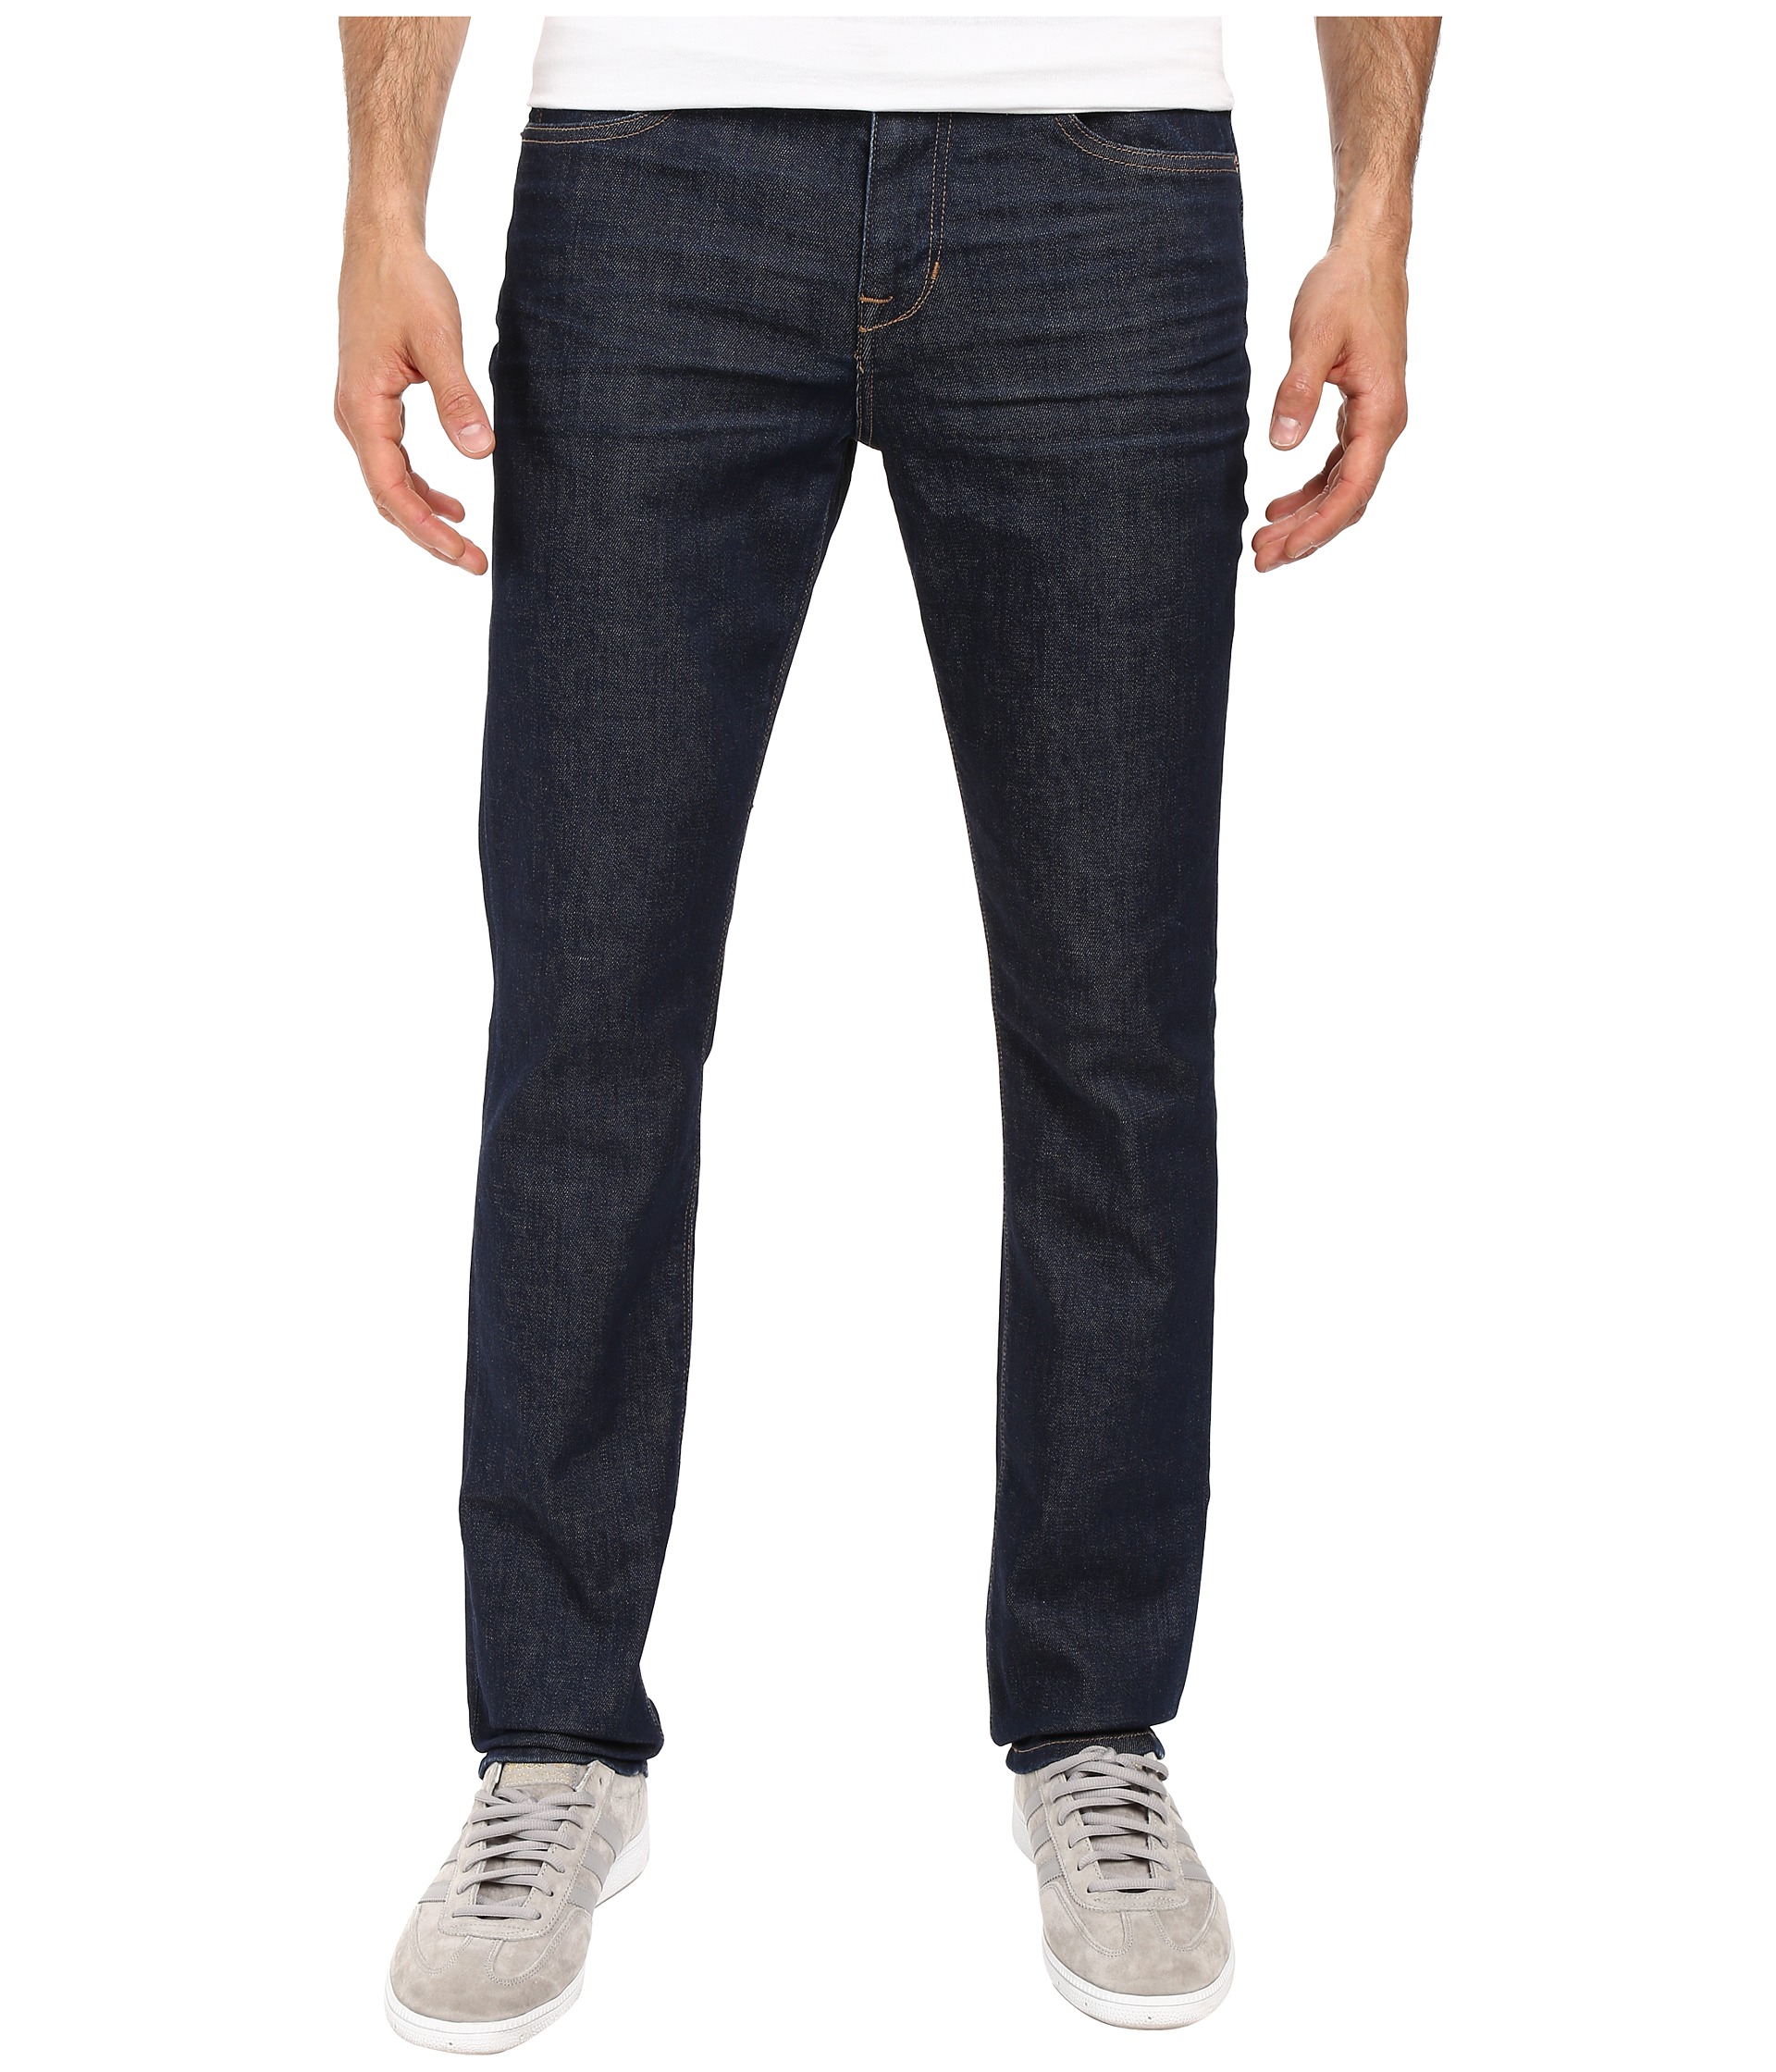 Joe's Jeans Slim Fit in Asher Asher - Zappos.com Free Shipping BOTH Ways